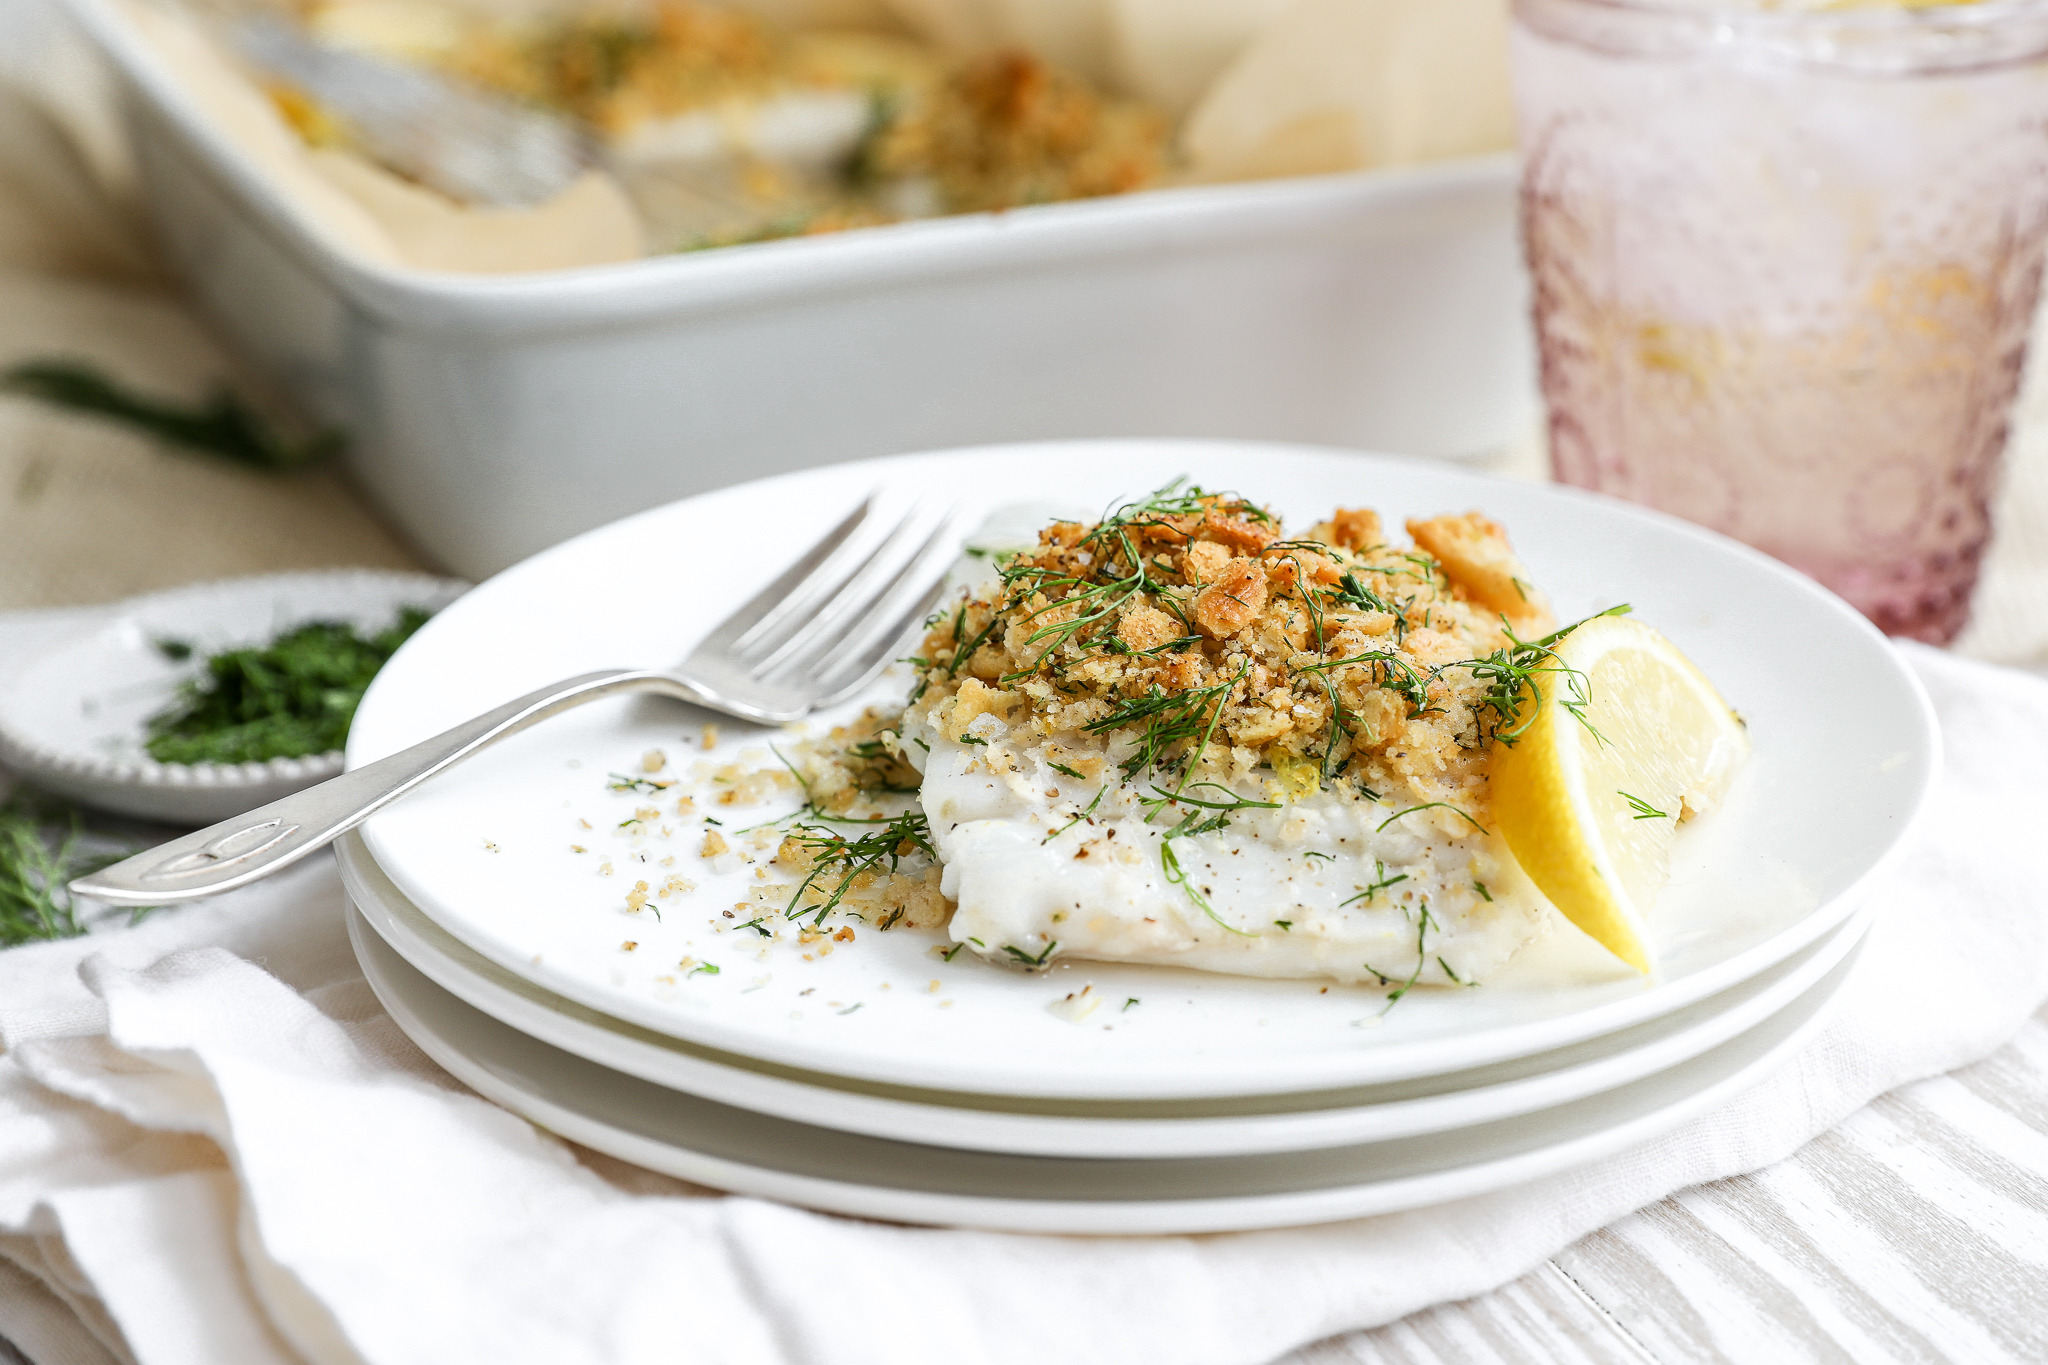 An image of cod crusted with crackers